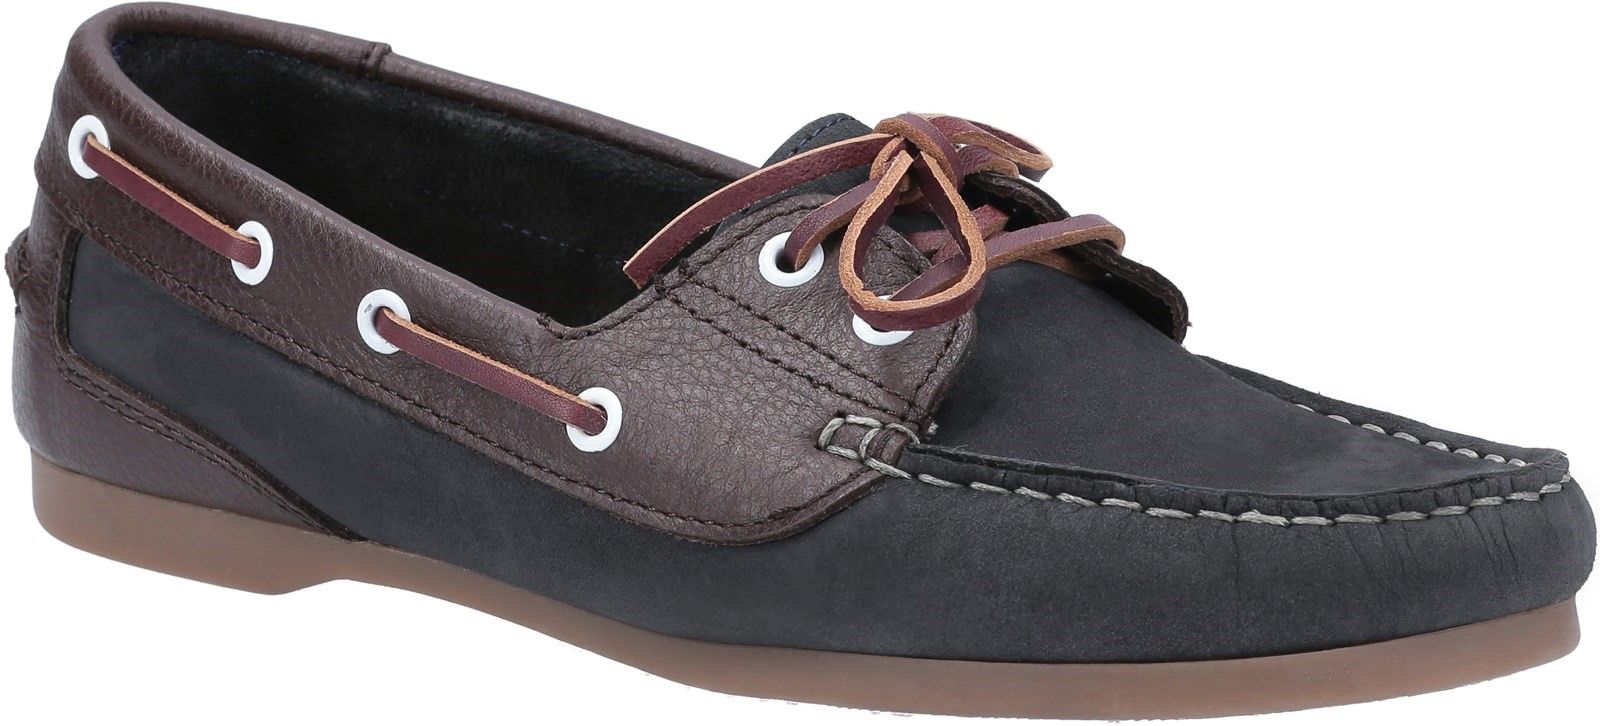 Riva Palafrugell is a womens smart and versatile lace up boat shoe with multi coloured leather uppers and contrast top stitching detail.